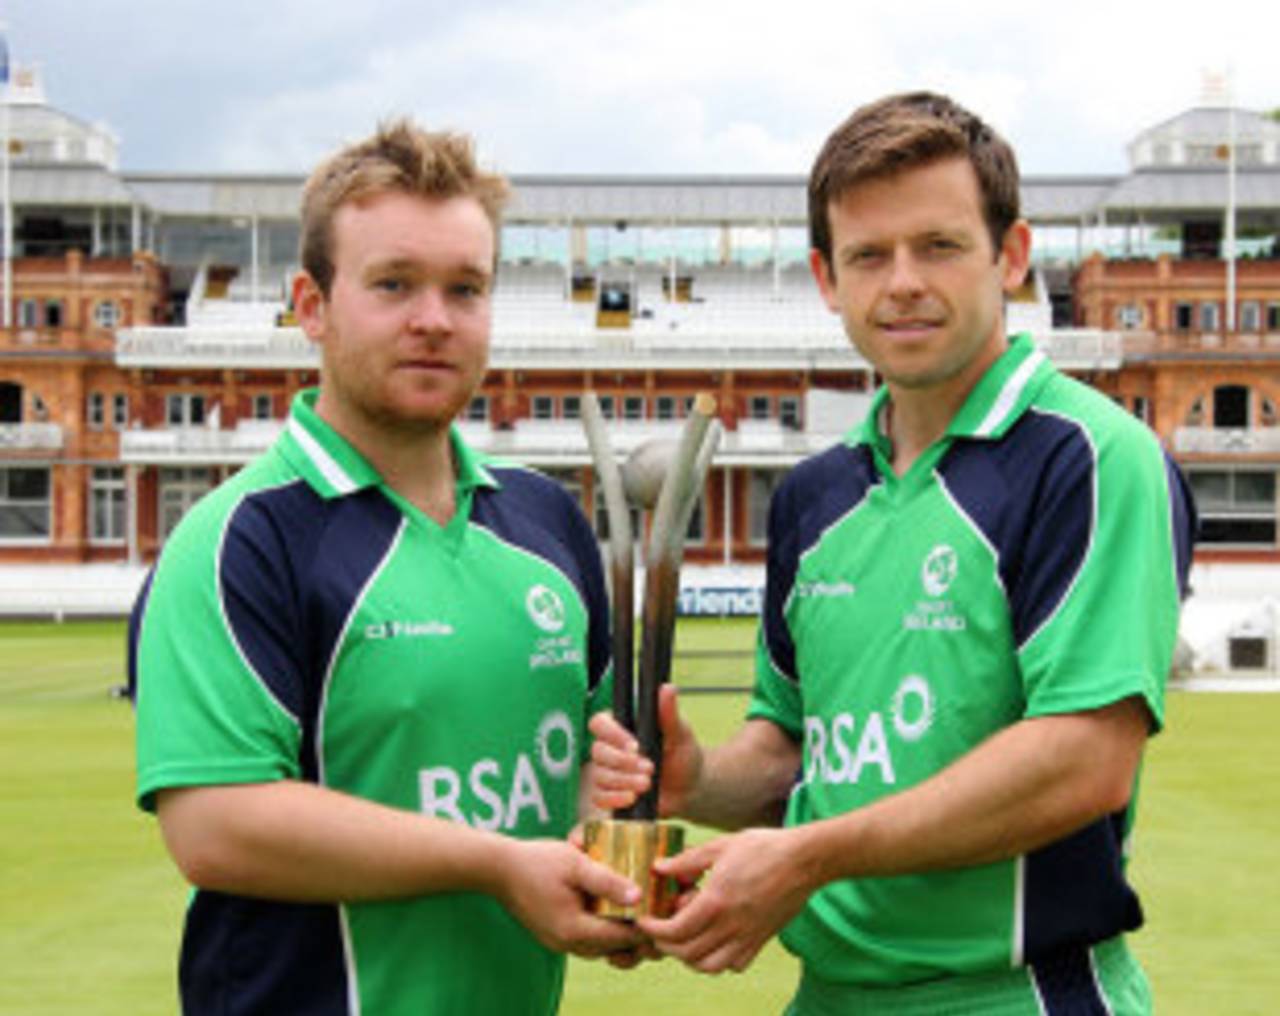 Paul Stirling and Ed Joyce launch the RSA Challenge which will be played on September 3 against England and be another chance for Ireland to impress&nbsp;&nbsp;&bull;&nbsp;&nbsp;Cricket Ireland